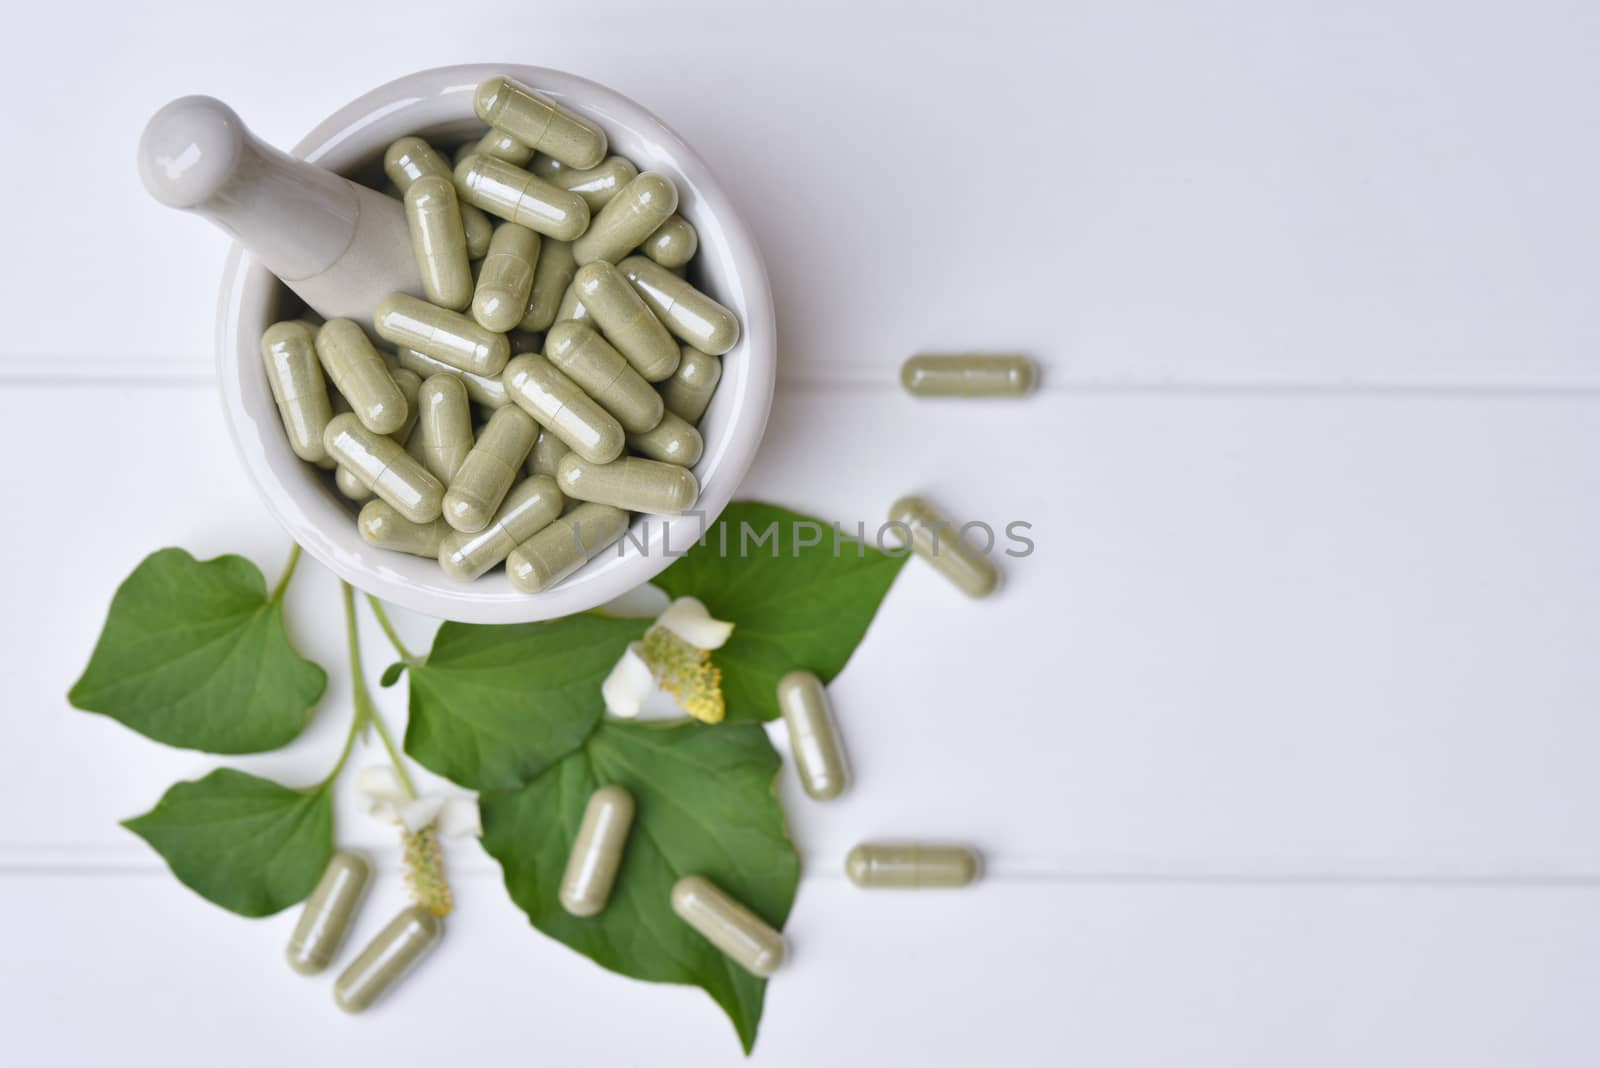 Top view Herbal medicine in capsules from Houttuynia cordata or chameleon fish mint leaf in Mortar medicine on white background. with copy space for medical background. healthy natural product.